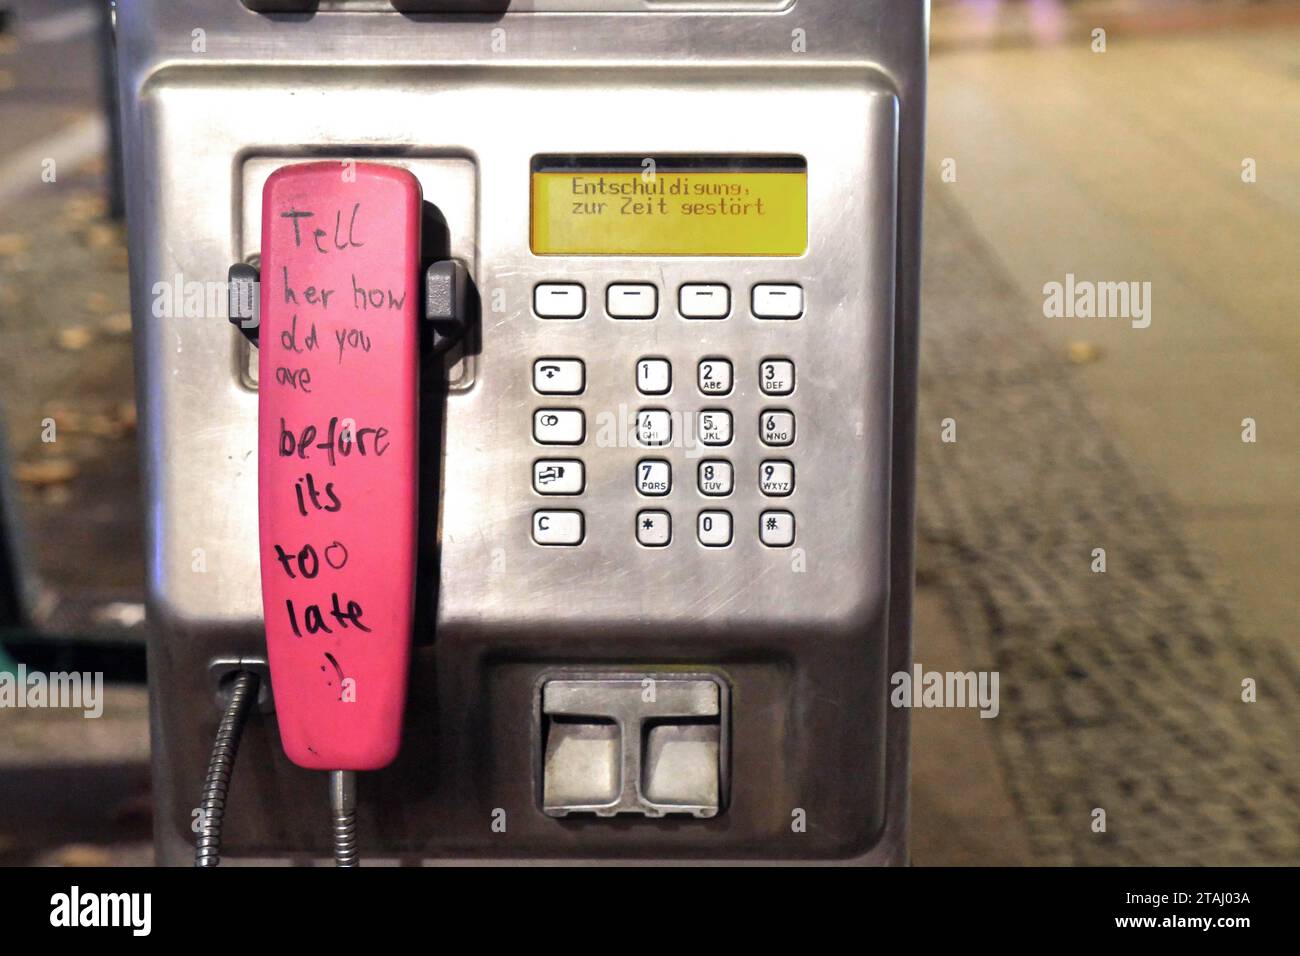 RECORD DATE NOT STATED 24.11.2023, Berlin - Deutschland. Telefonzelle, Hörer ist beschriftet mit: tell her how old you are before itÂ s to late. *** 24 11 2023, Berlin Germany Phone booth, handset is labeled tell her how old you are before itÂ s to late Credit: Imago/Alamy Live News Stock Photo